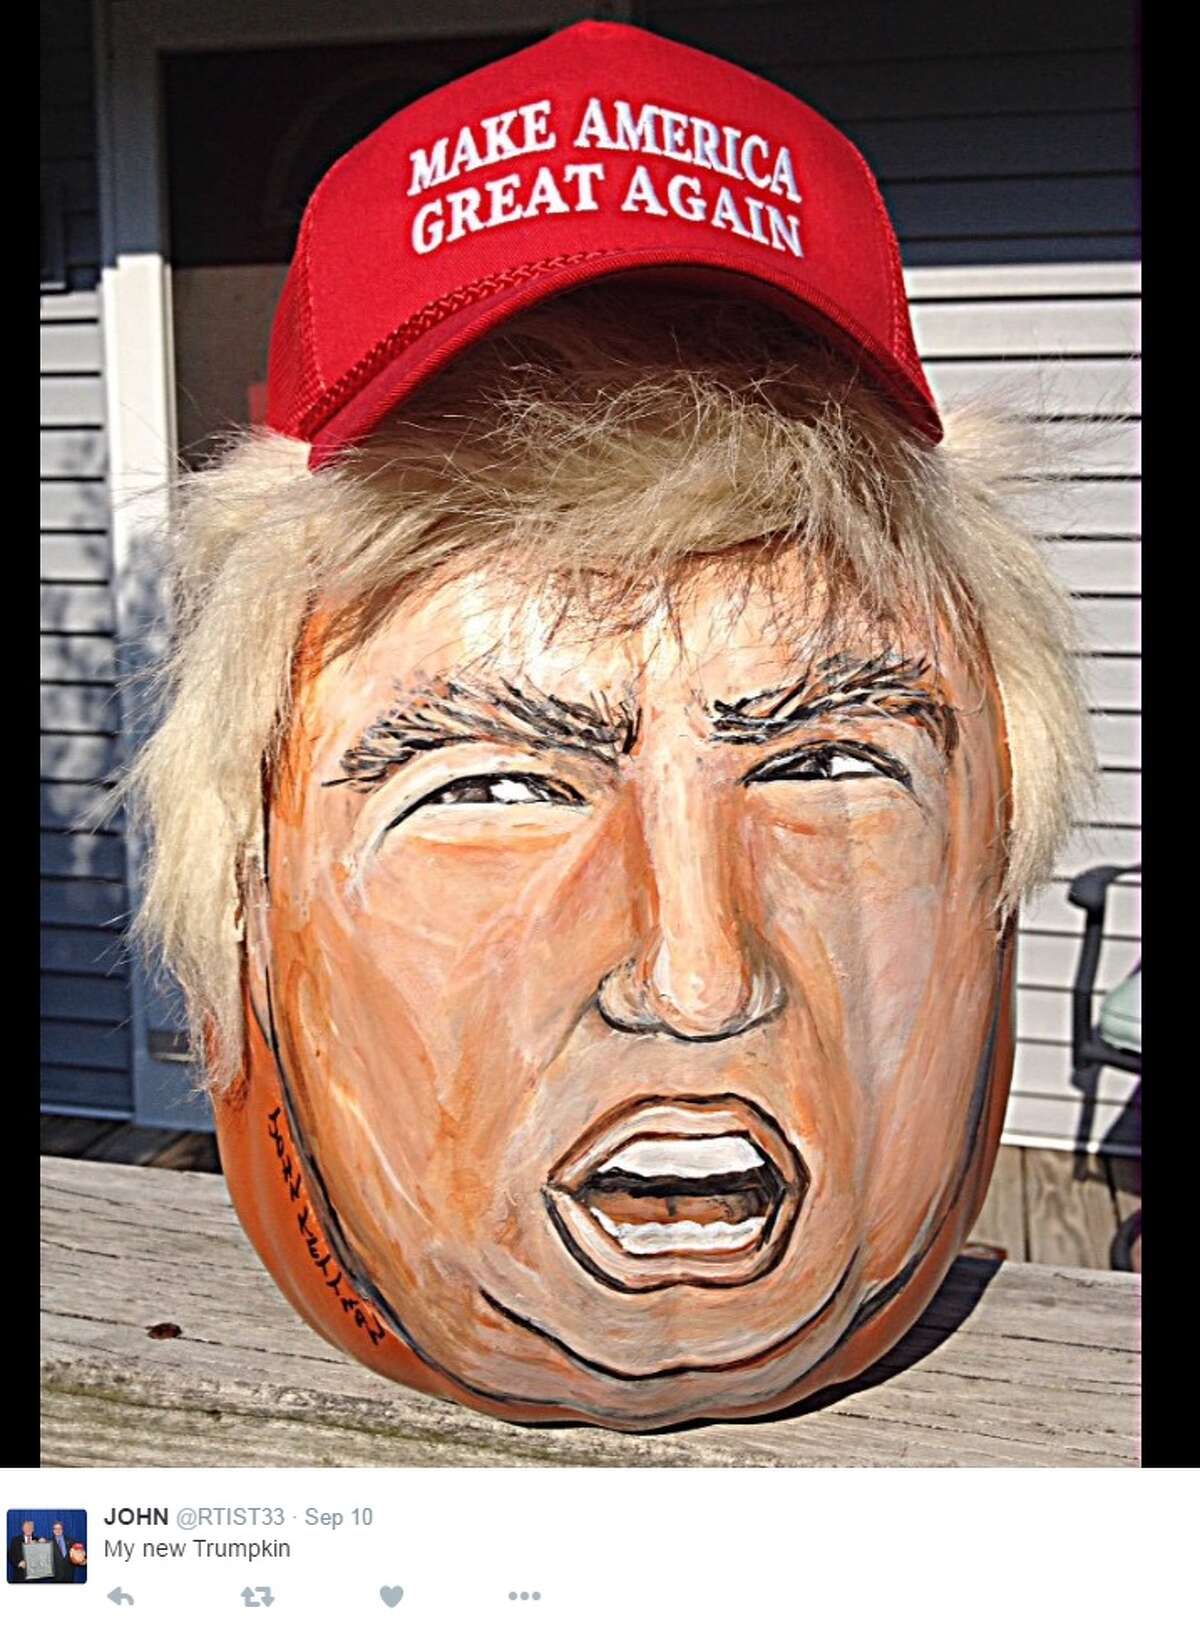 "Trumpkins" are pumpkins carved or painted to look like Donald Trump, the Republican nominee for president.